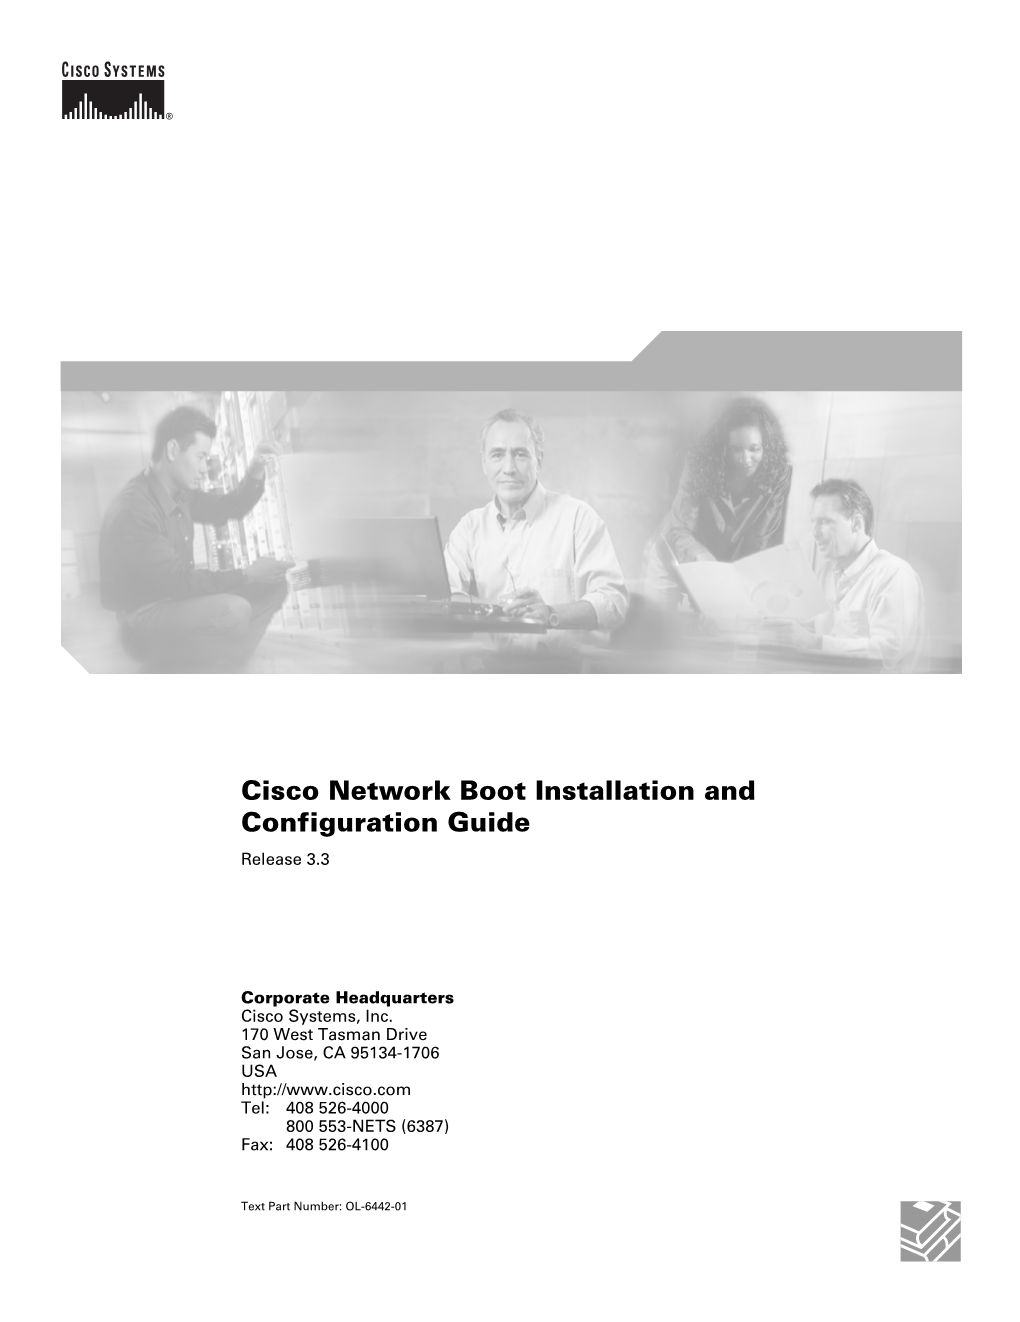 Cisco Network Boot Installation and Configuration Guide, Release€3.3